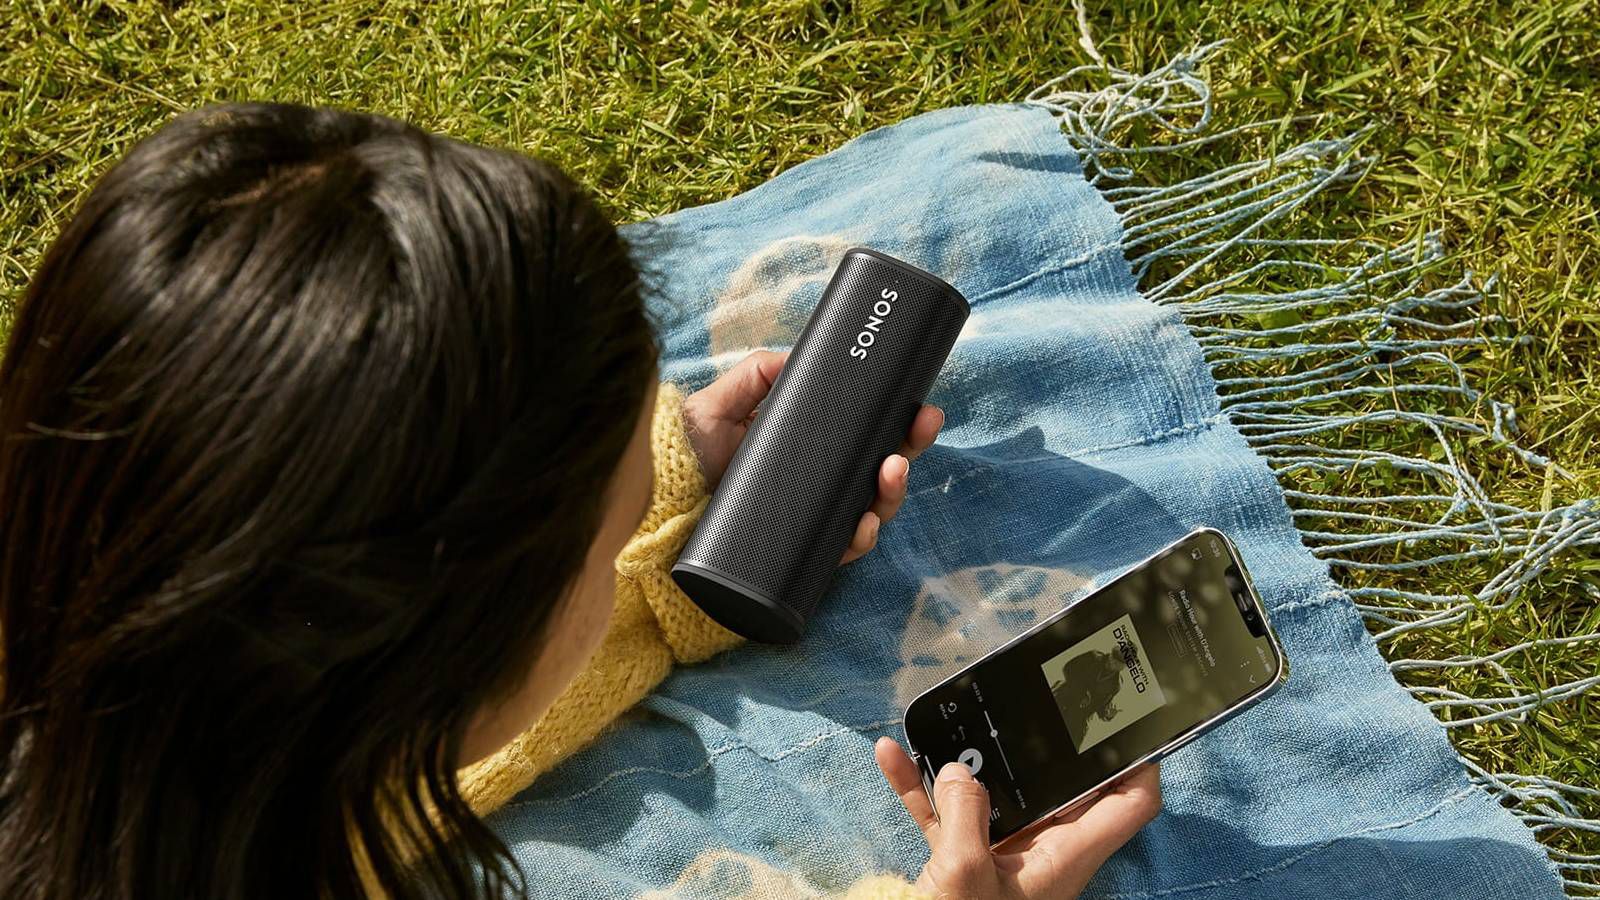 Sonos unveils $ 169 portable speaker with AirPlay 2, Sound Swap and more